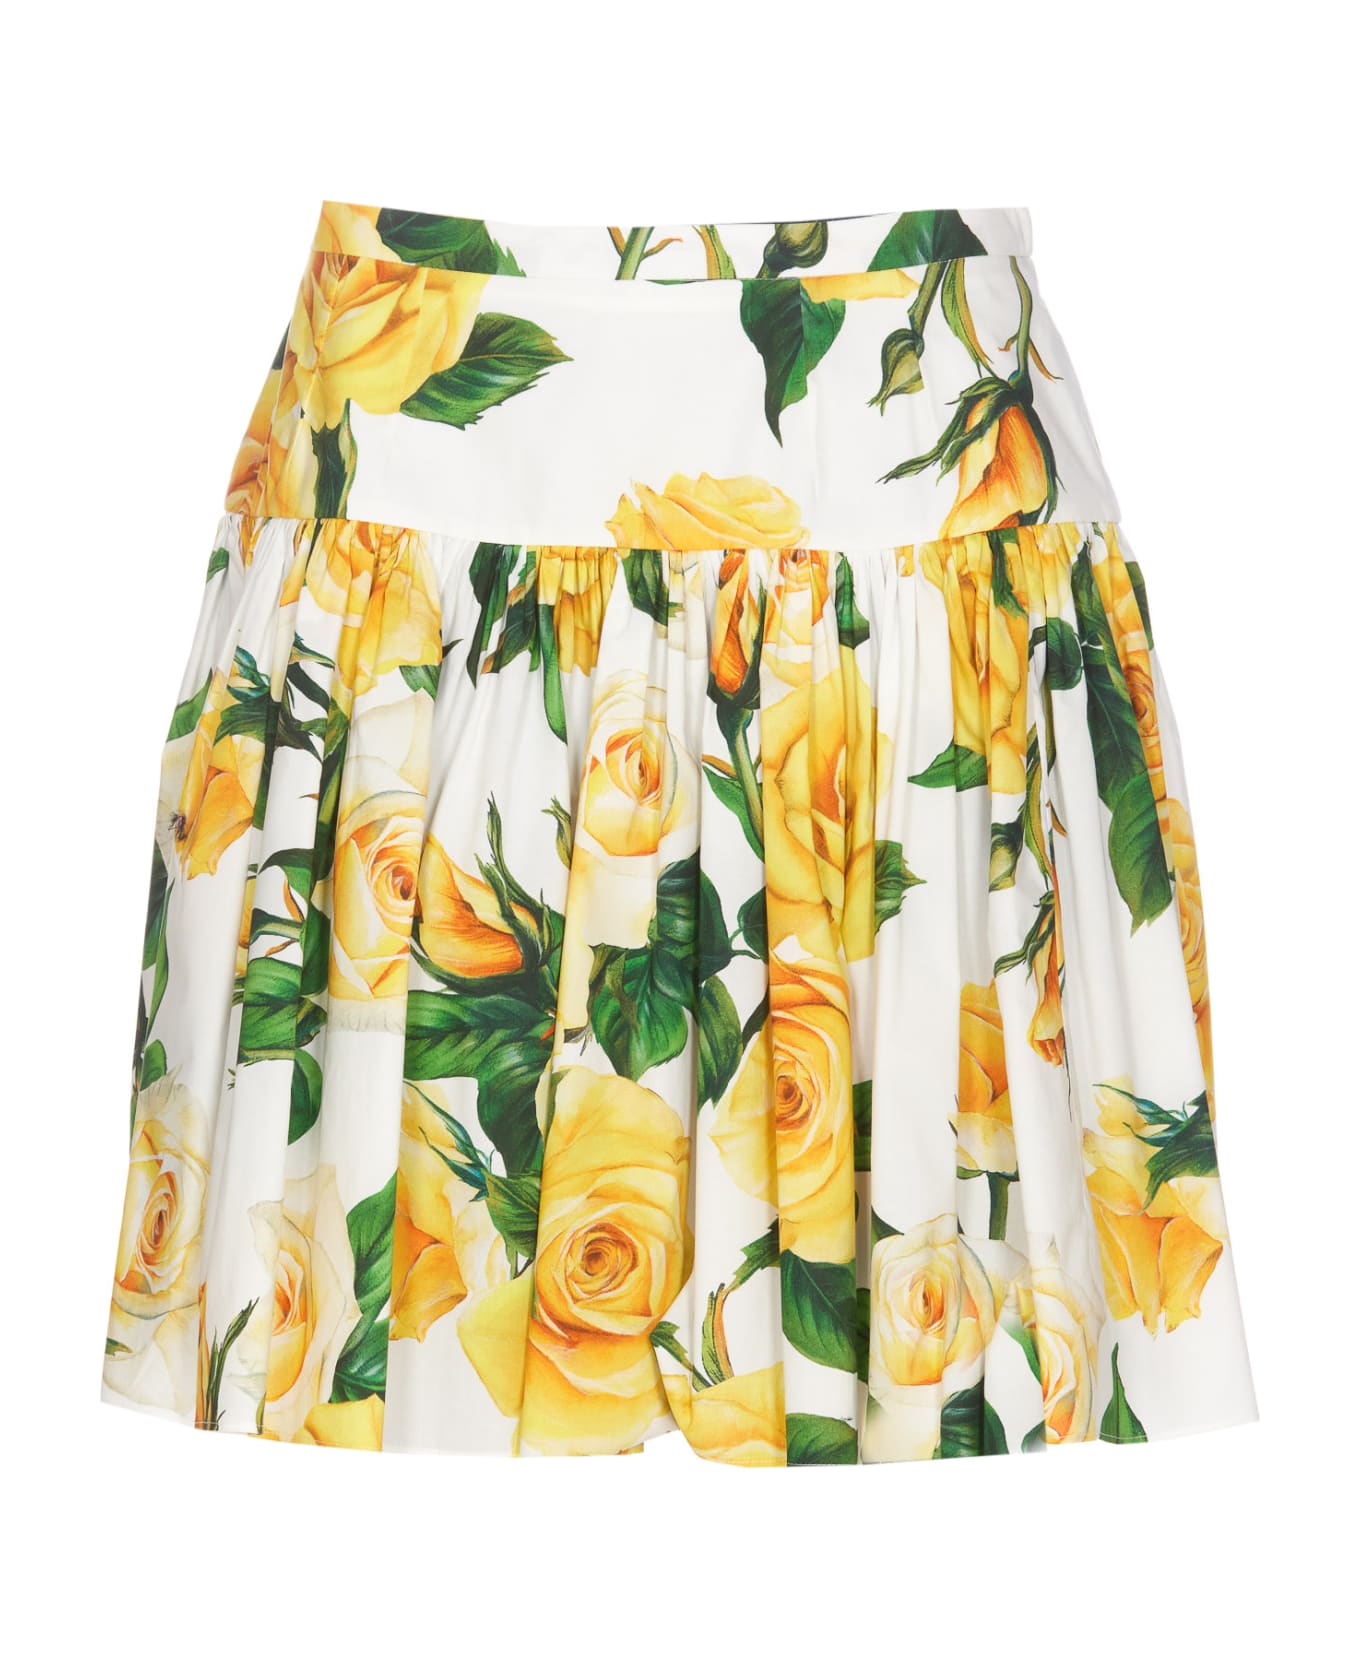 Dolce & Gabbana Floral Printed Mini Skirt - Vo Rose Gialle Bianco